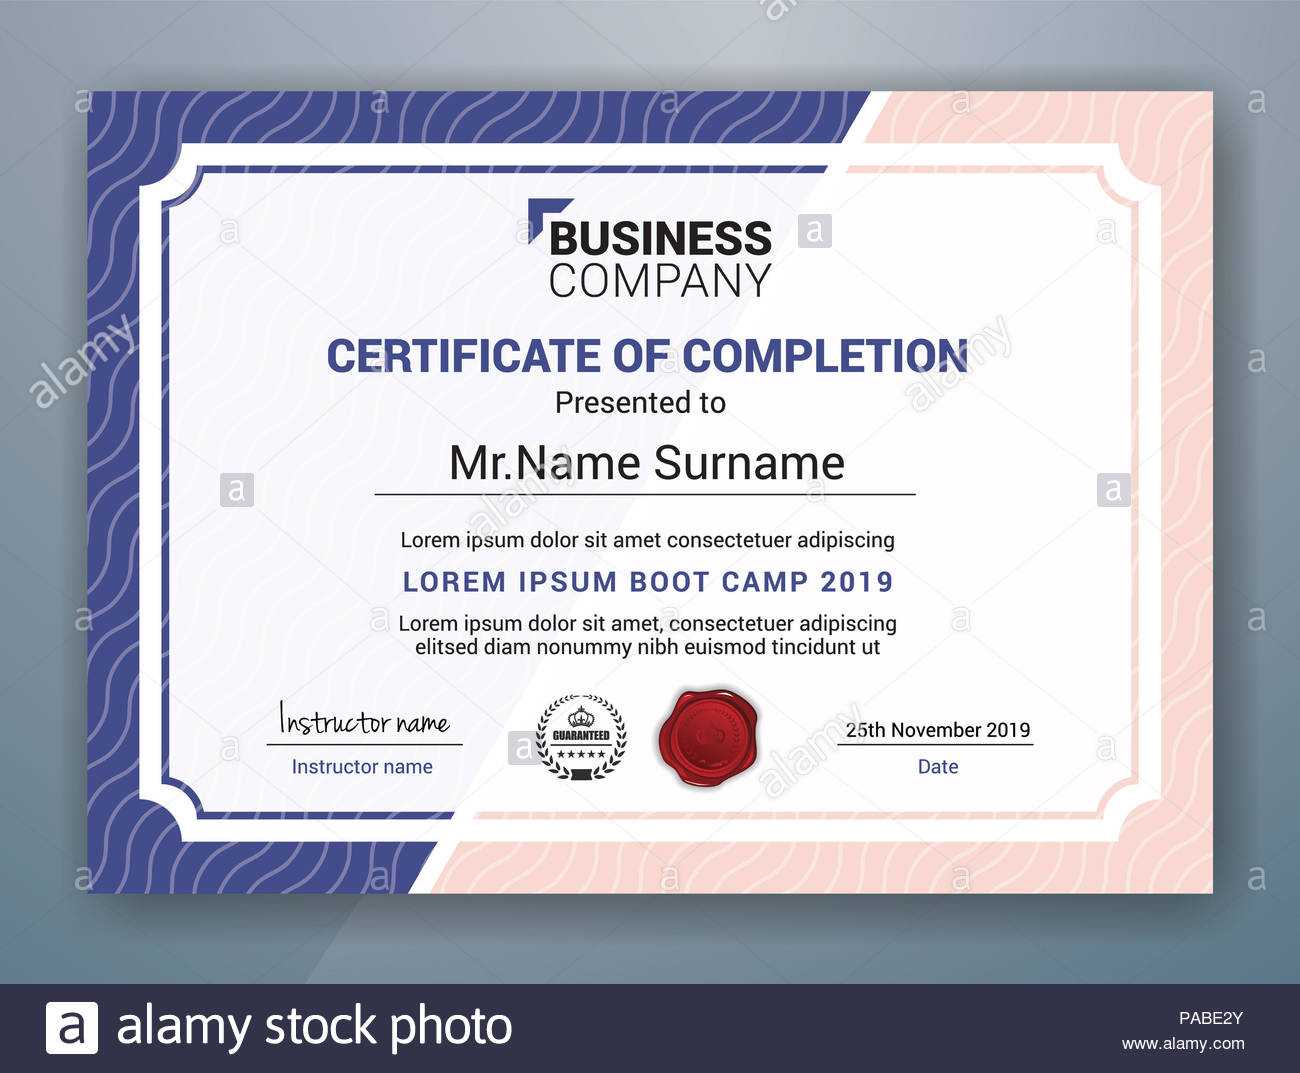 Multipurpose Professional Certificate Template Design For With Boot Camp Certificate Template